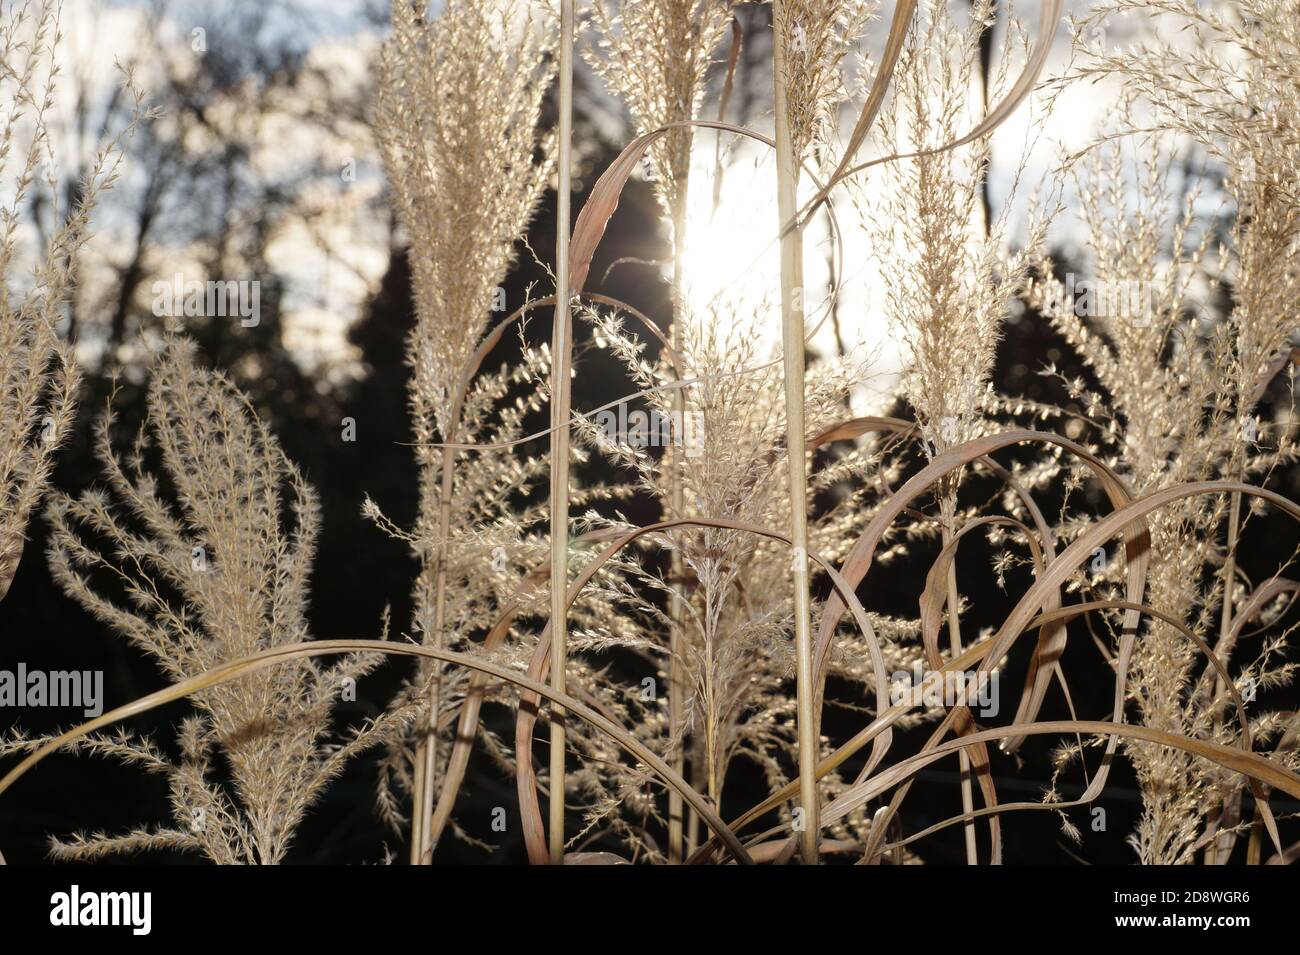 A variety of Zebra grass during flowering. Miscanthus sinensis, the maiden silvergrass, is a species of flowering plant in the grass family Poaceae, n Stock Photo